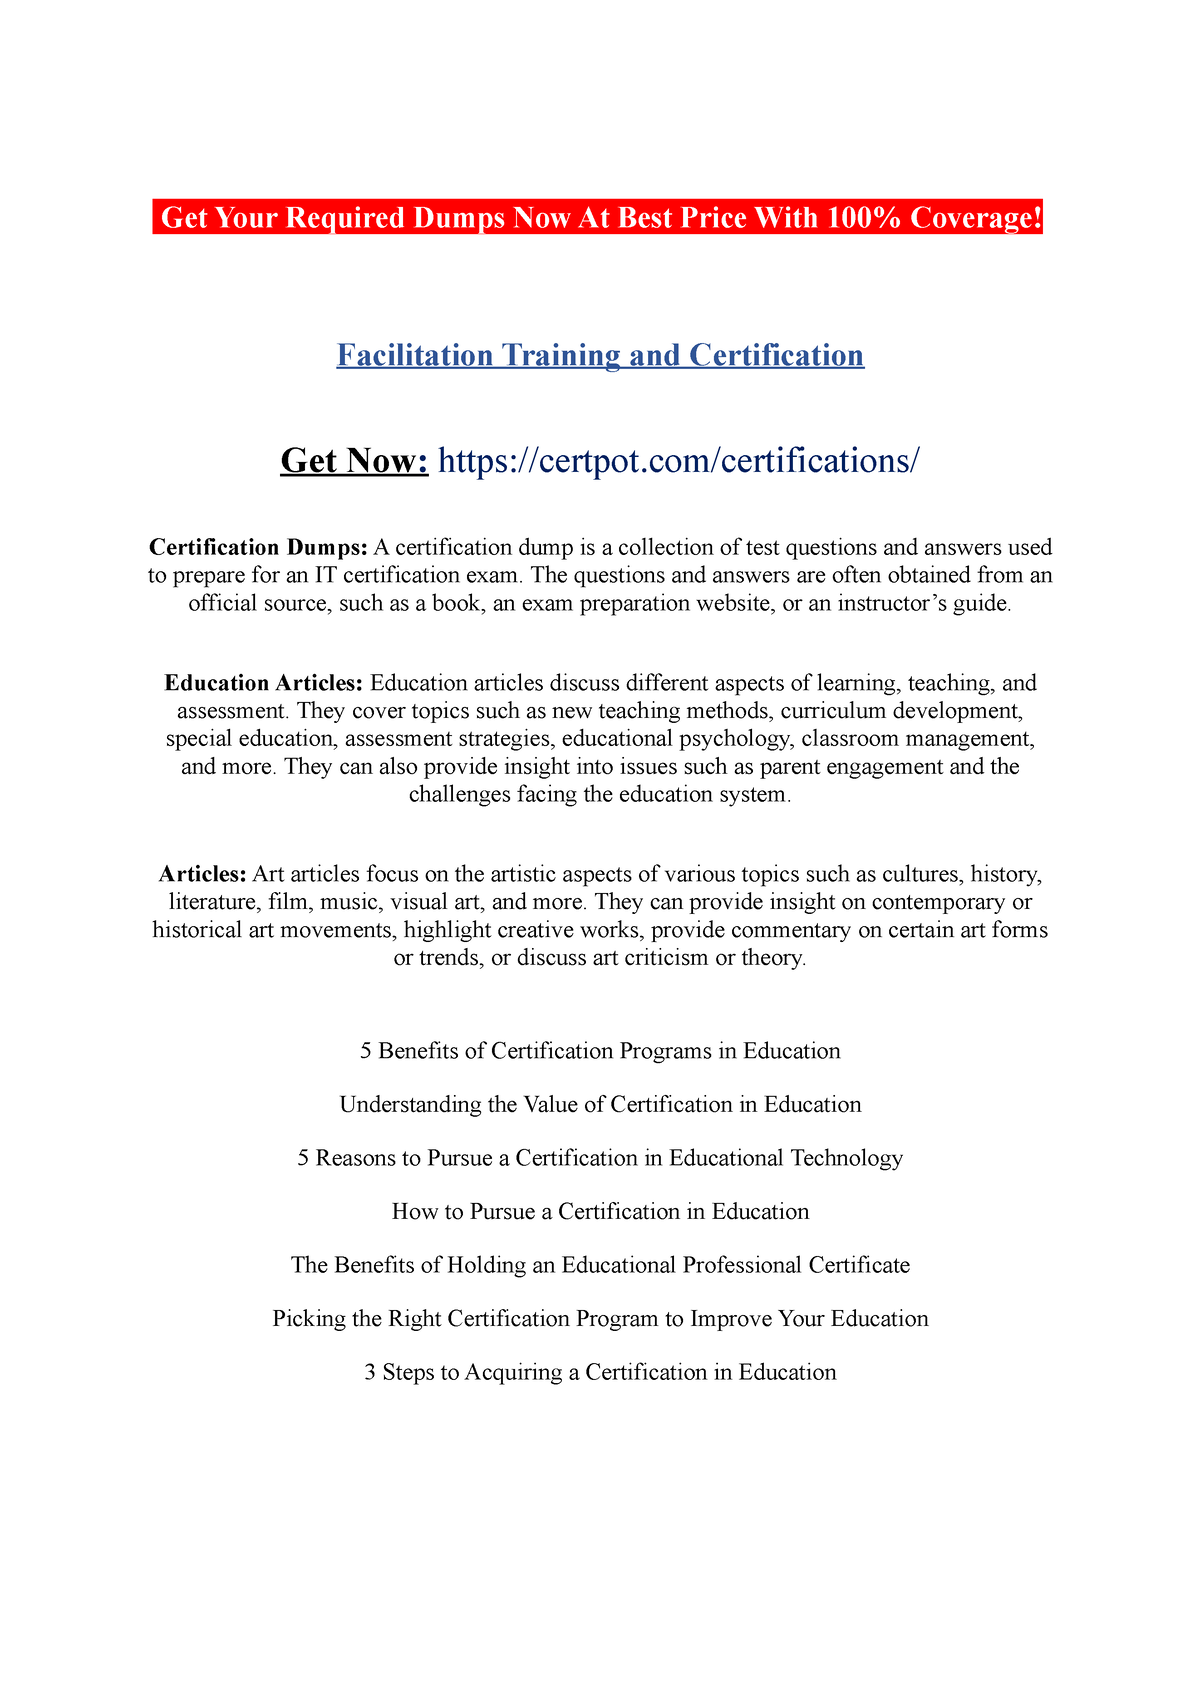 Facilitation Training and Certification Get Your Required Dumps Now